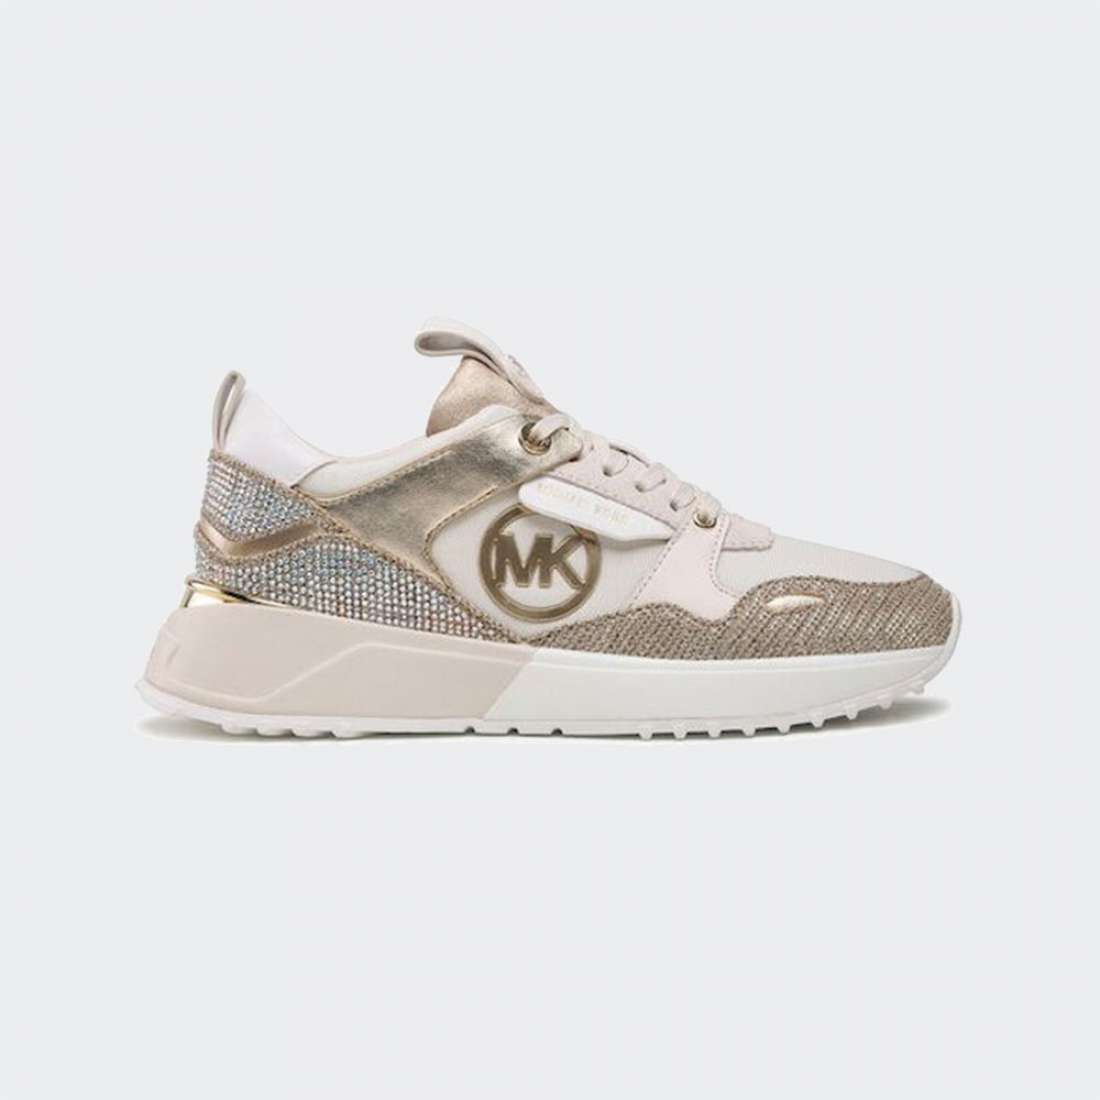 MICHAEL KORS THEO TRAINER PALE GOLD